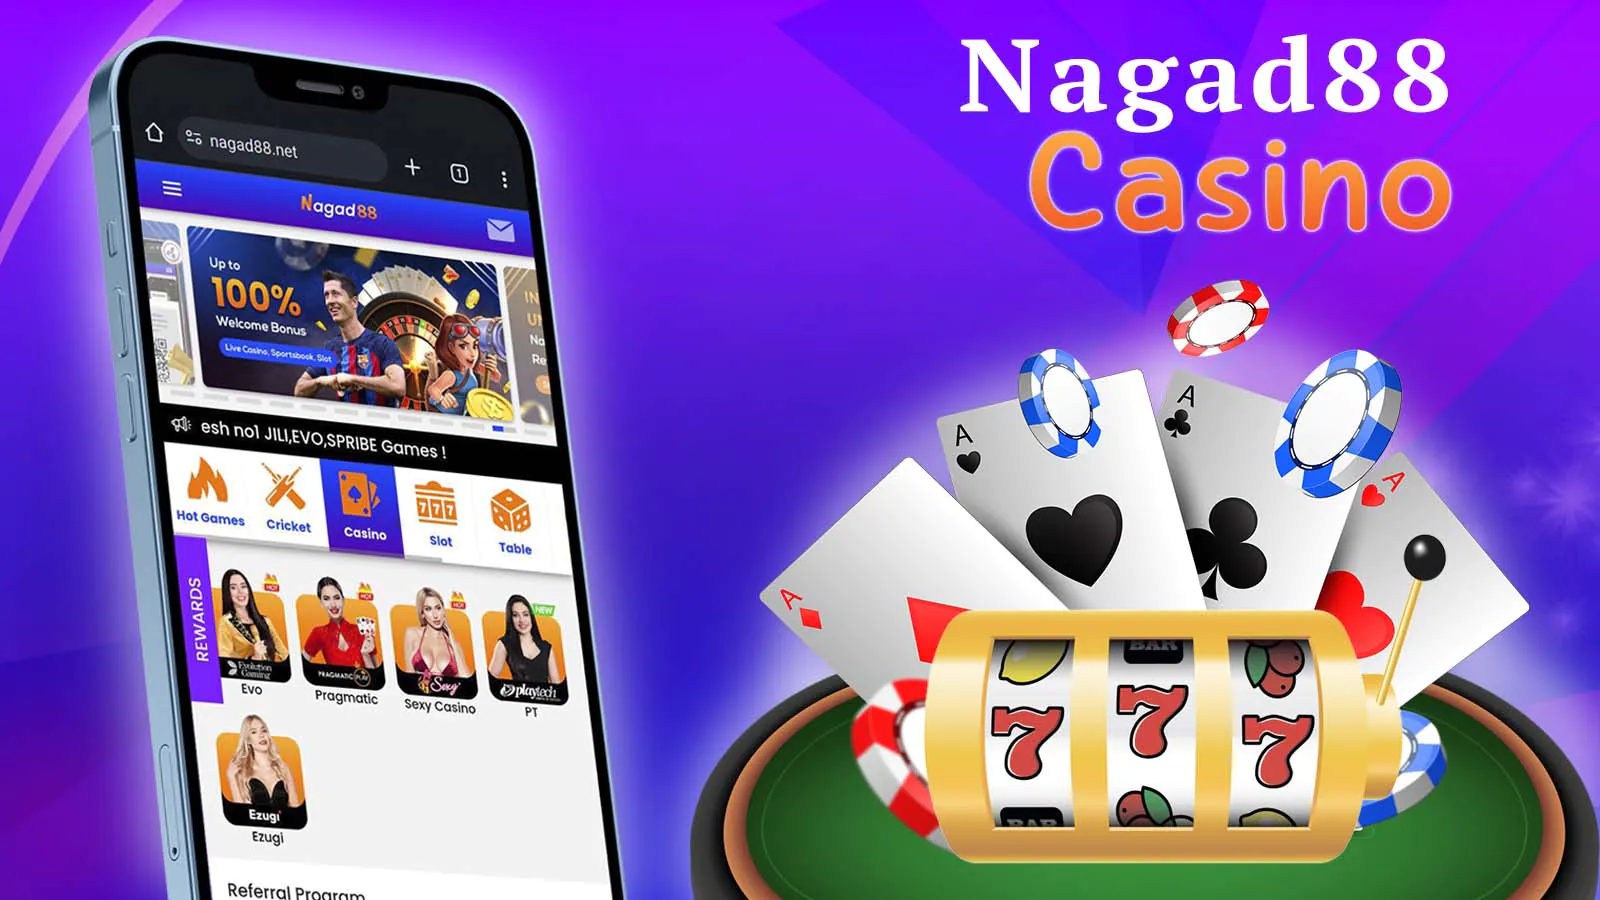 Hundreds of different games from licensed providers at Nagad88 casino